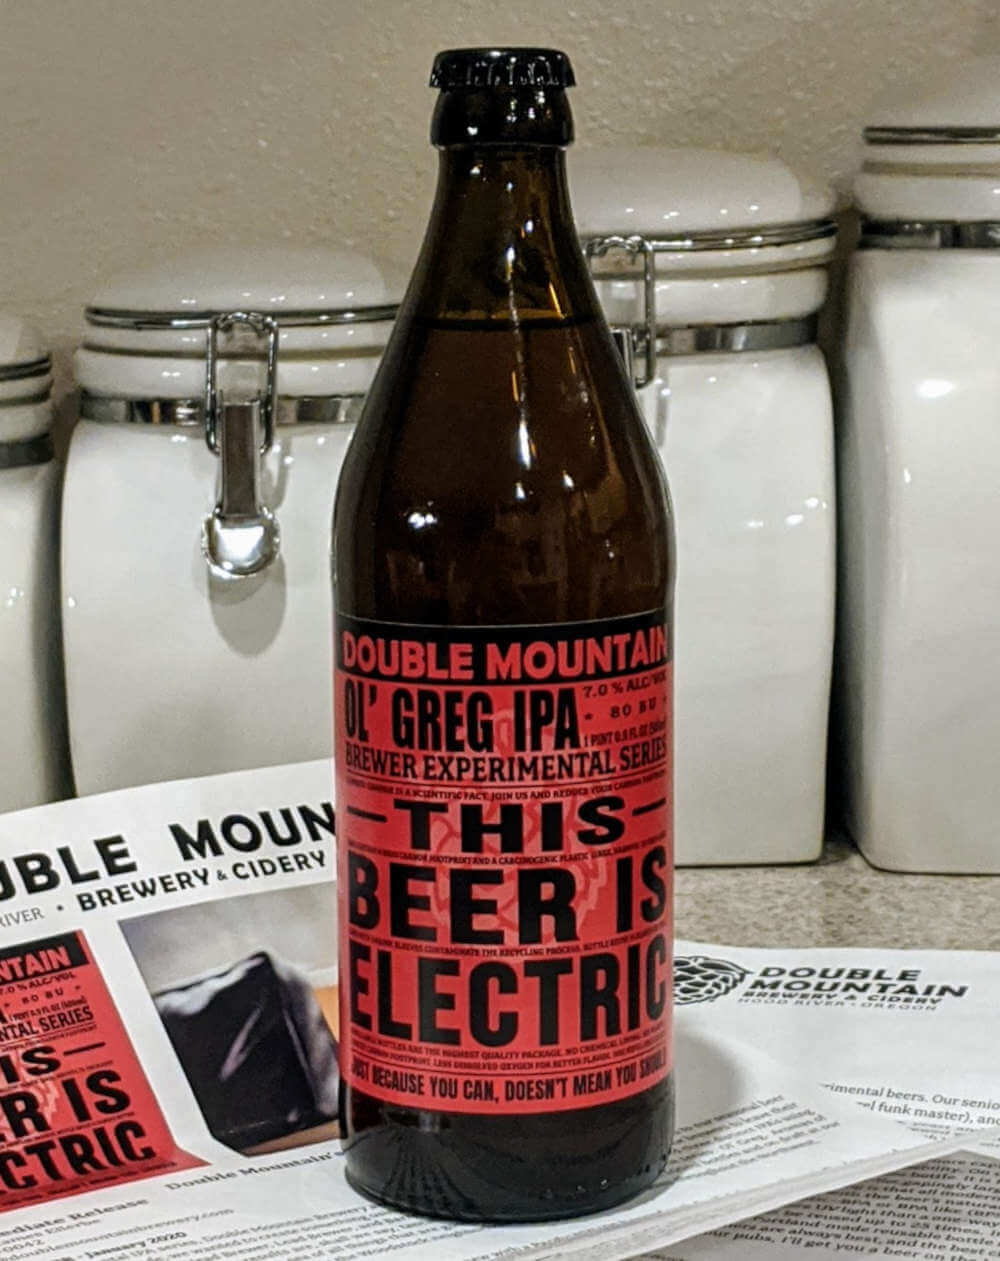 Received: Double Mountain Brewery Ol’ Greg IPA